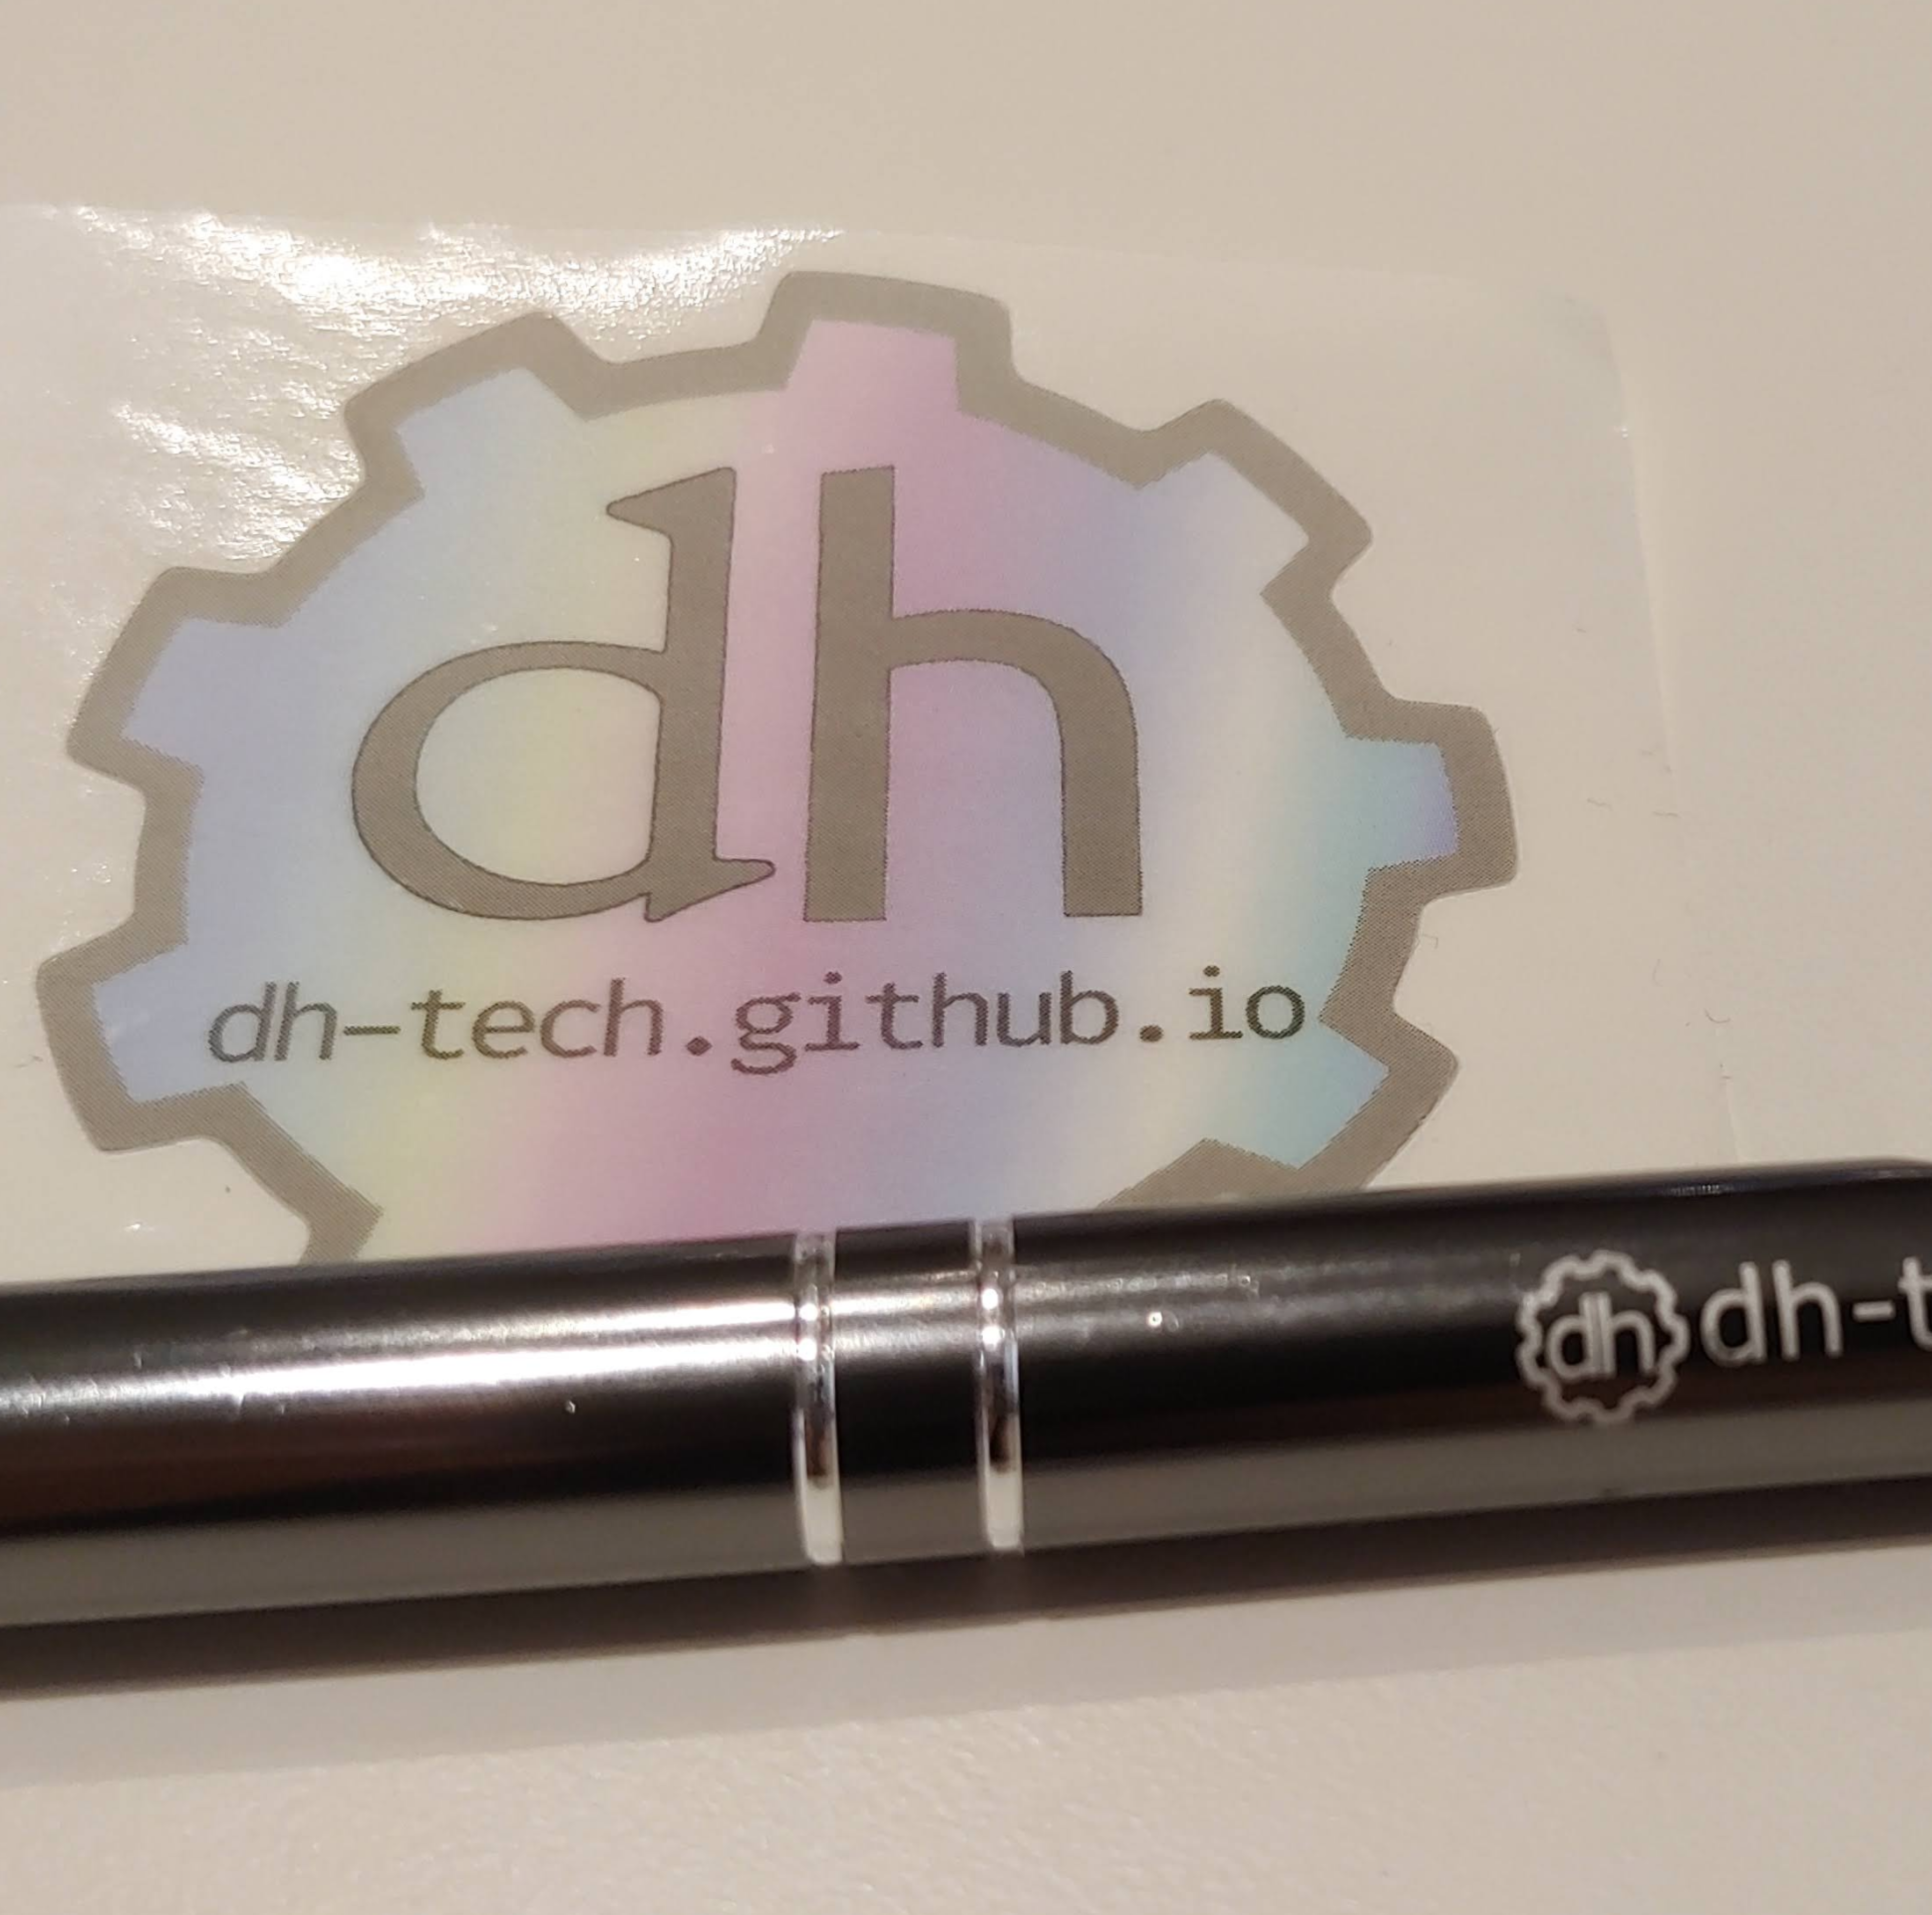 Reinventing the DHTech logo